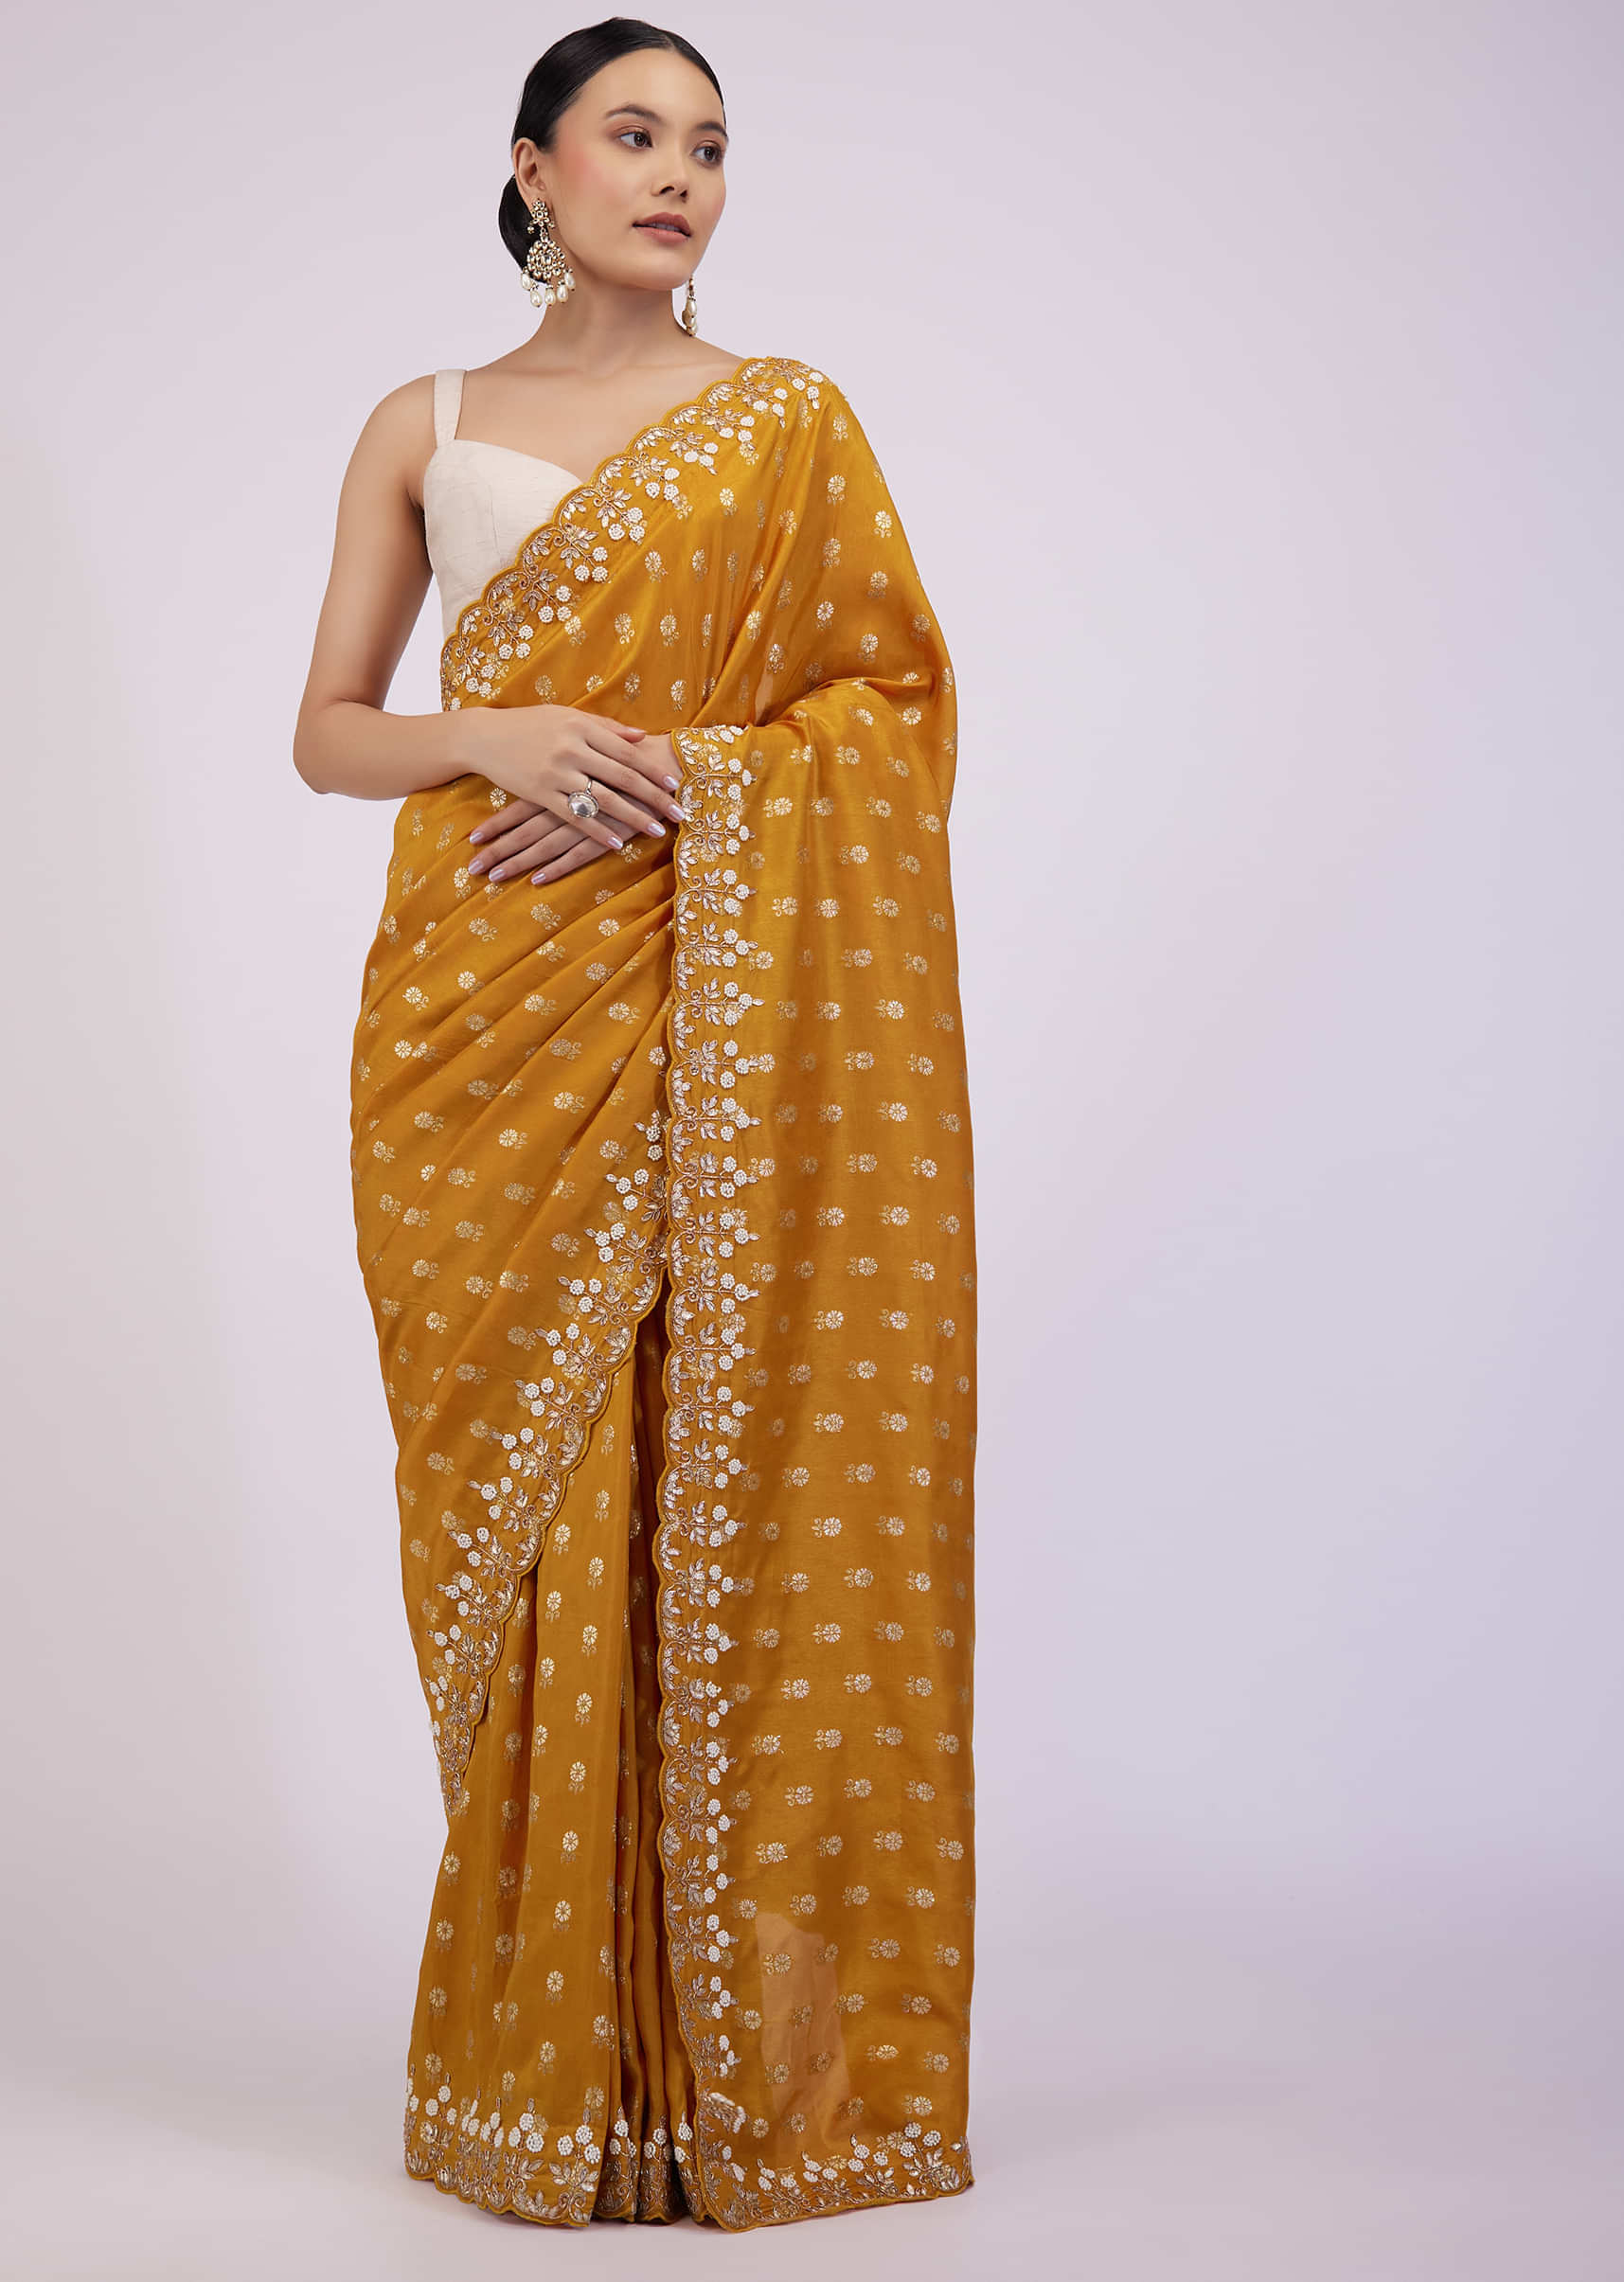 Topaz Yellow Silk Saree With Foil Print And Embroidery